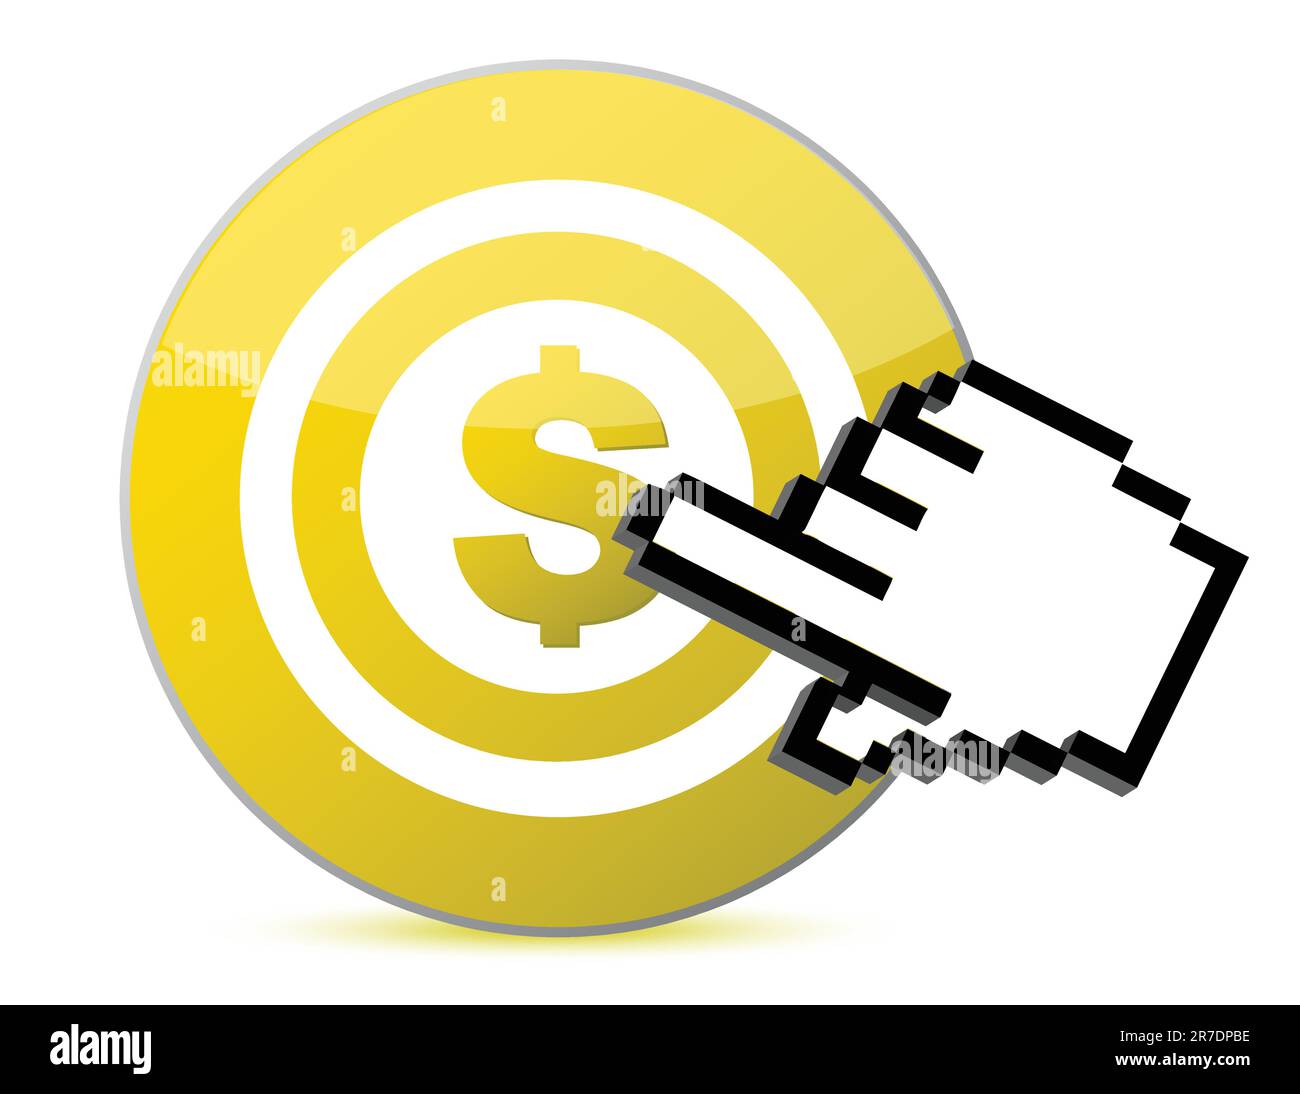 Target with dollar currency sign illustration with a hand cursor illustration Stock Vector